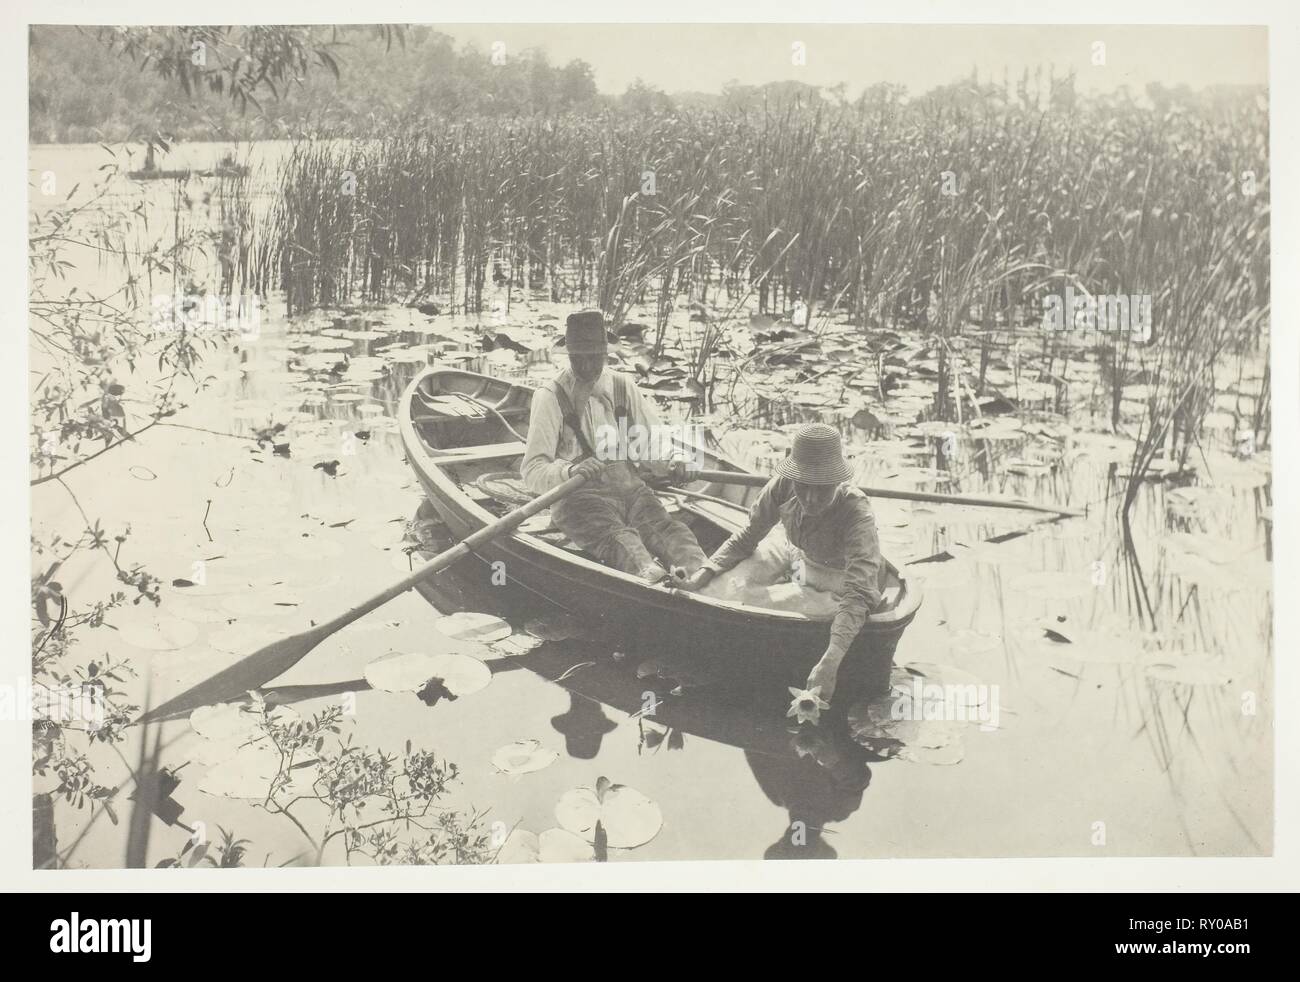 Gathering Water-Lilies. Peter Henry Emerson; English, born Cuba, 1856-1936. Date: 1886. Dimensions: 19.7 × 29.1 cm (image/paper); 28.6 × 41 cm (album page). Platinum print, pl. IX from the album 'Life and Landscape on the Norfolk Broads' (1886), edition of 200. Origin: England. Museum: The Chicago Art Institute. Stock Photo